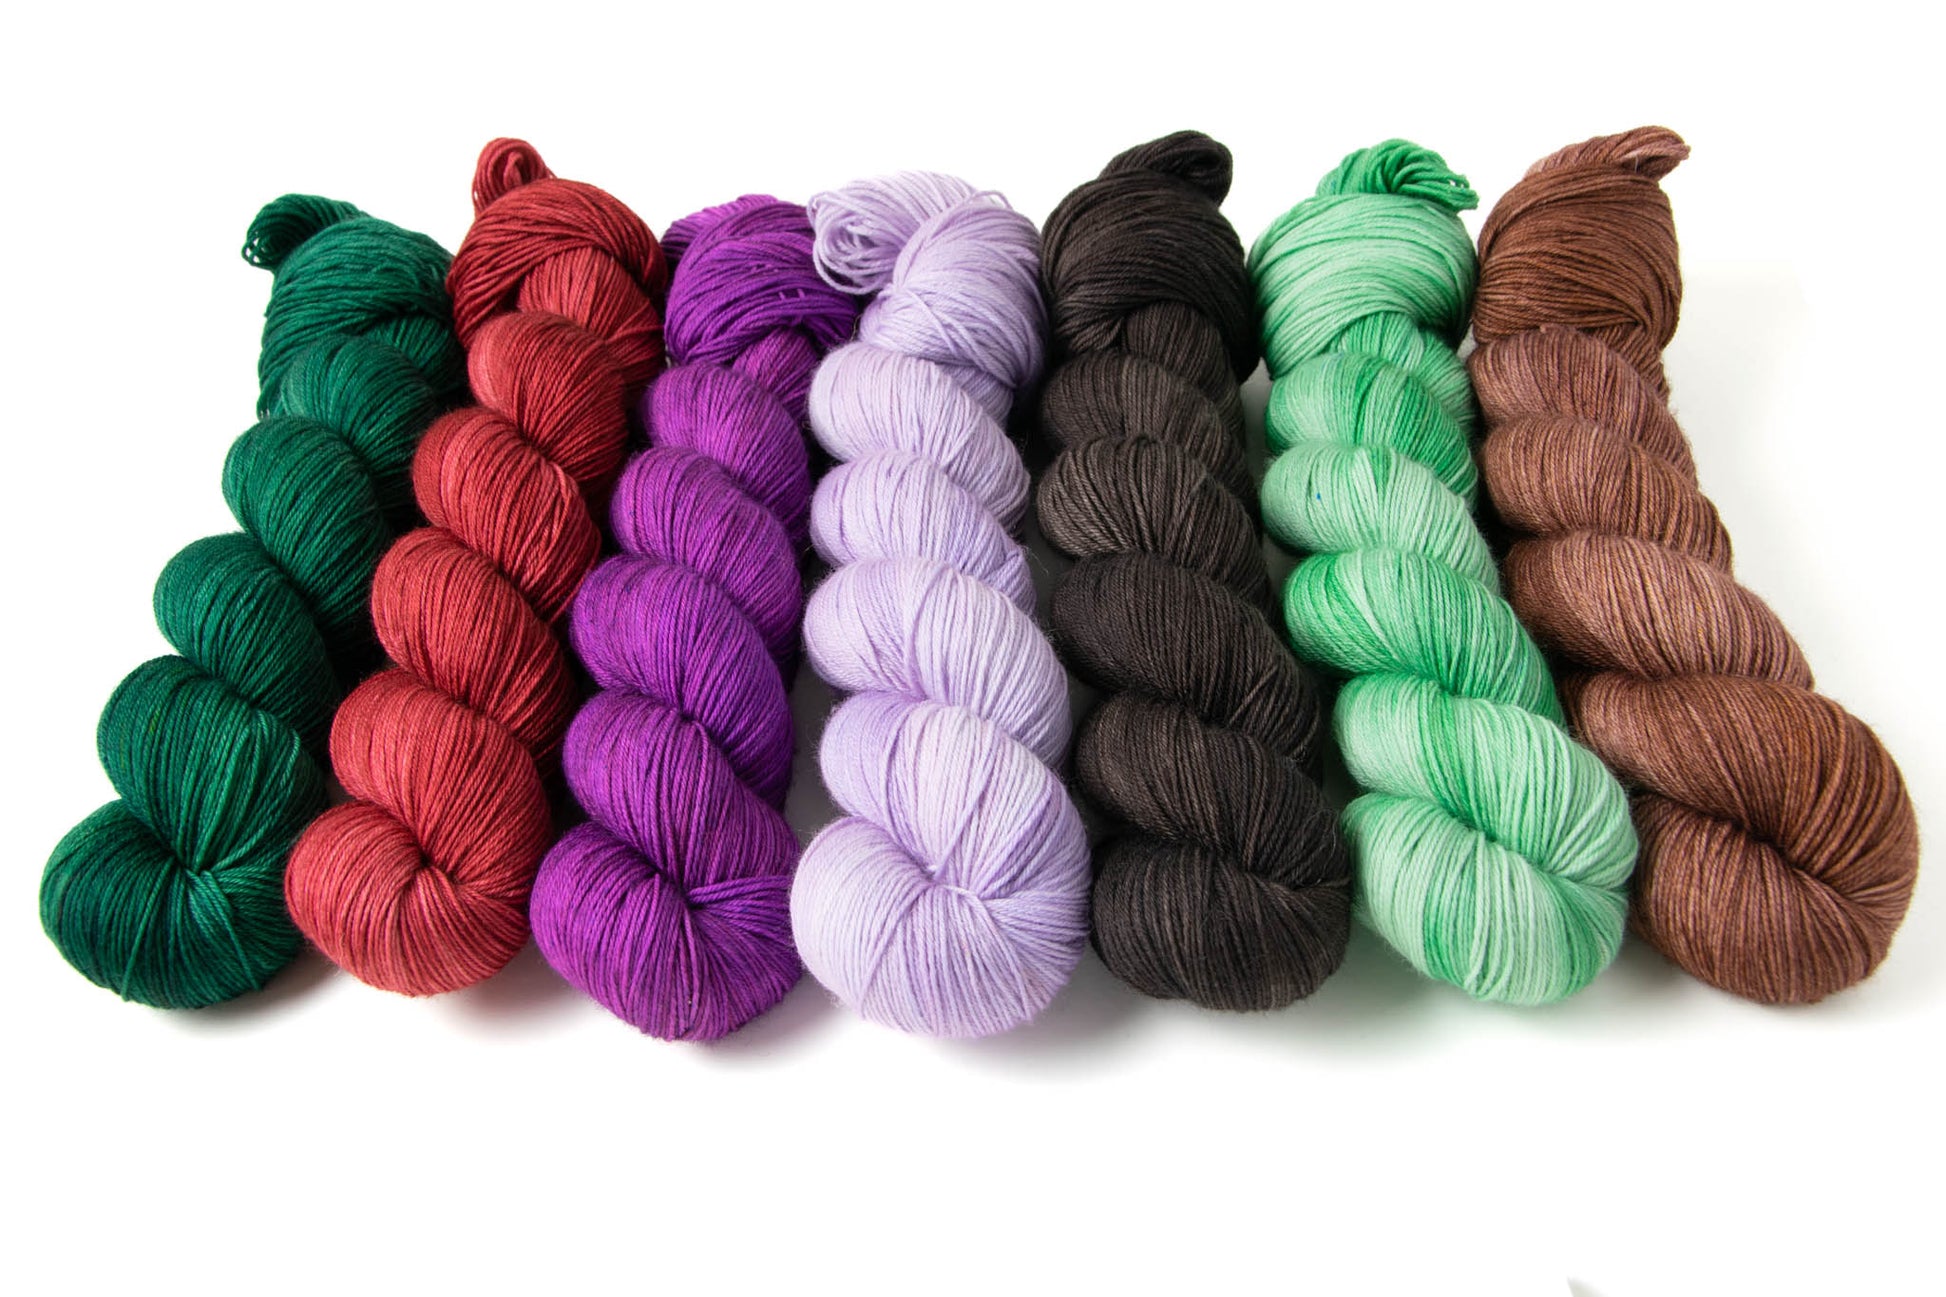 The seven Tonal skeins of the Cabin Collection: dark green, bright red, electric purple, pastel purple, black, pastel green, and brown.